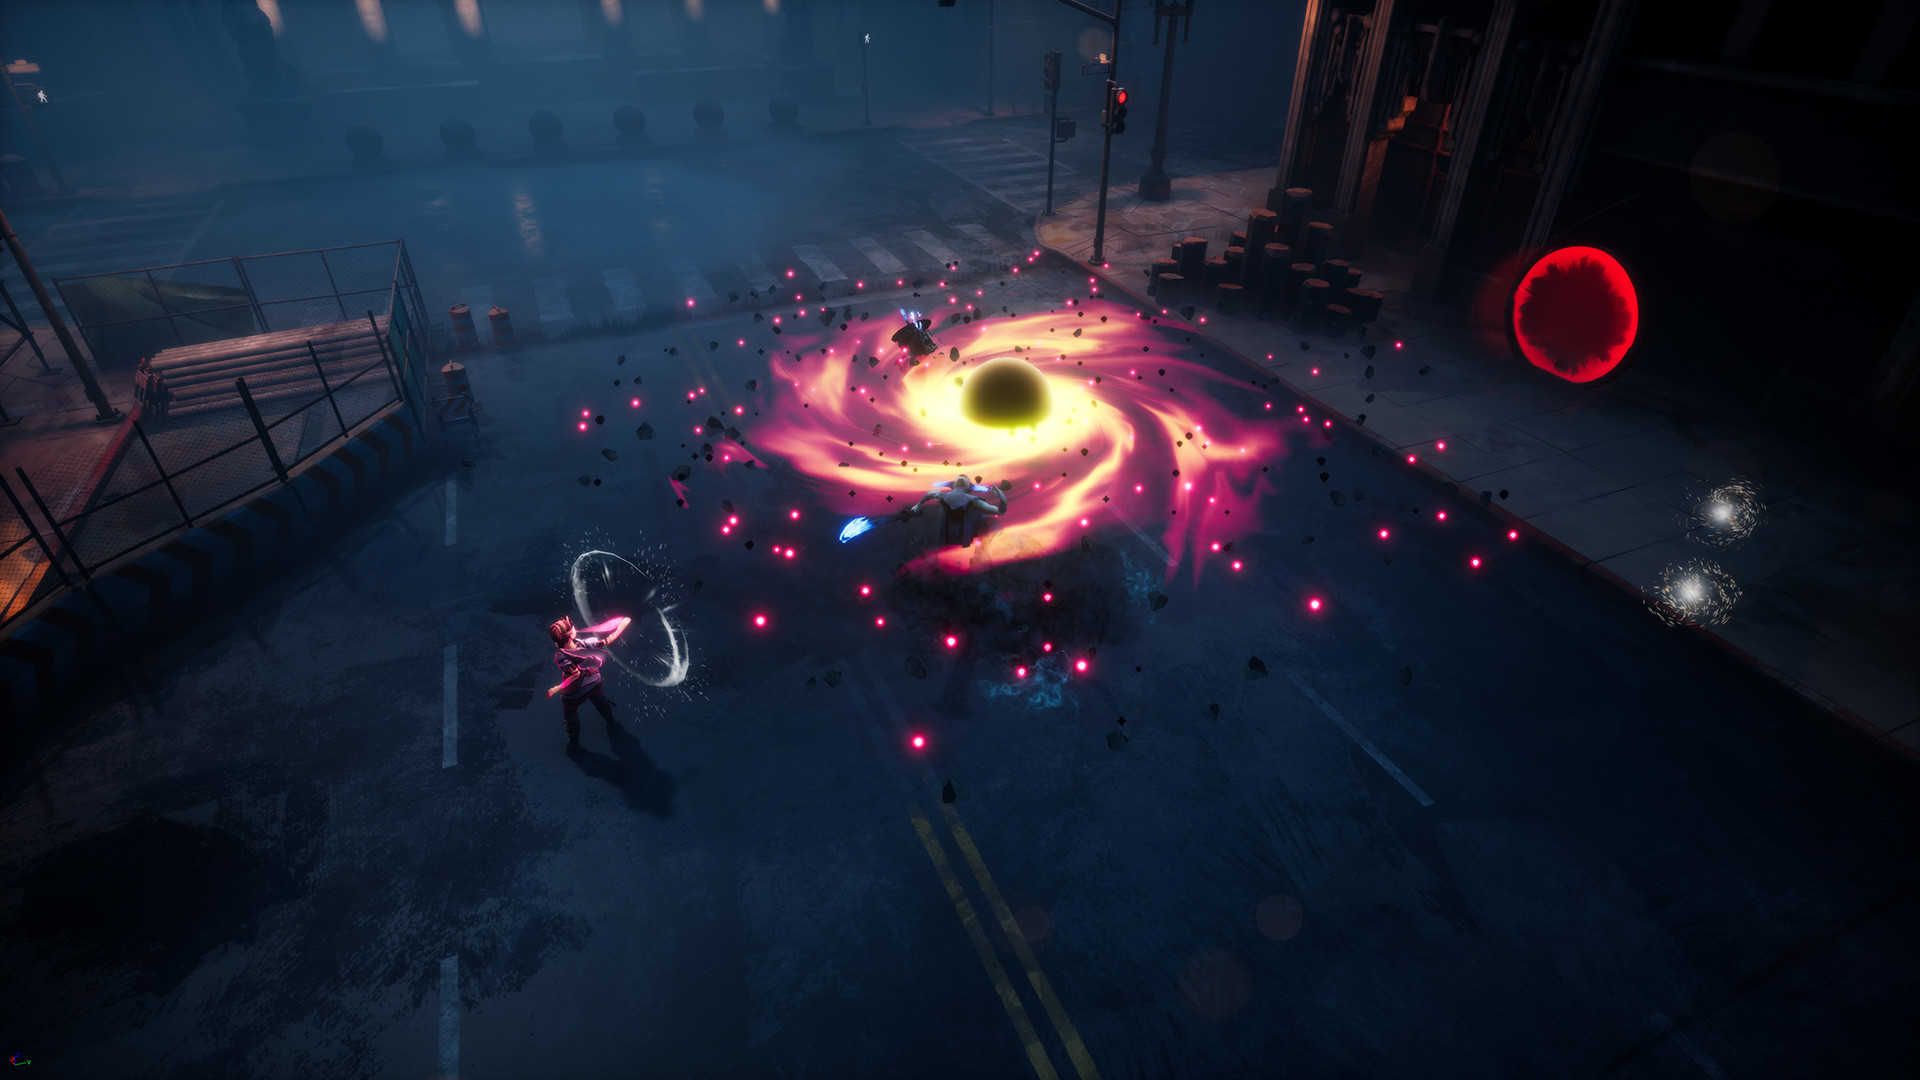 Promotional screenshot of the game Dreamscaper